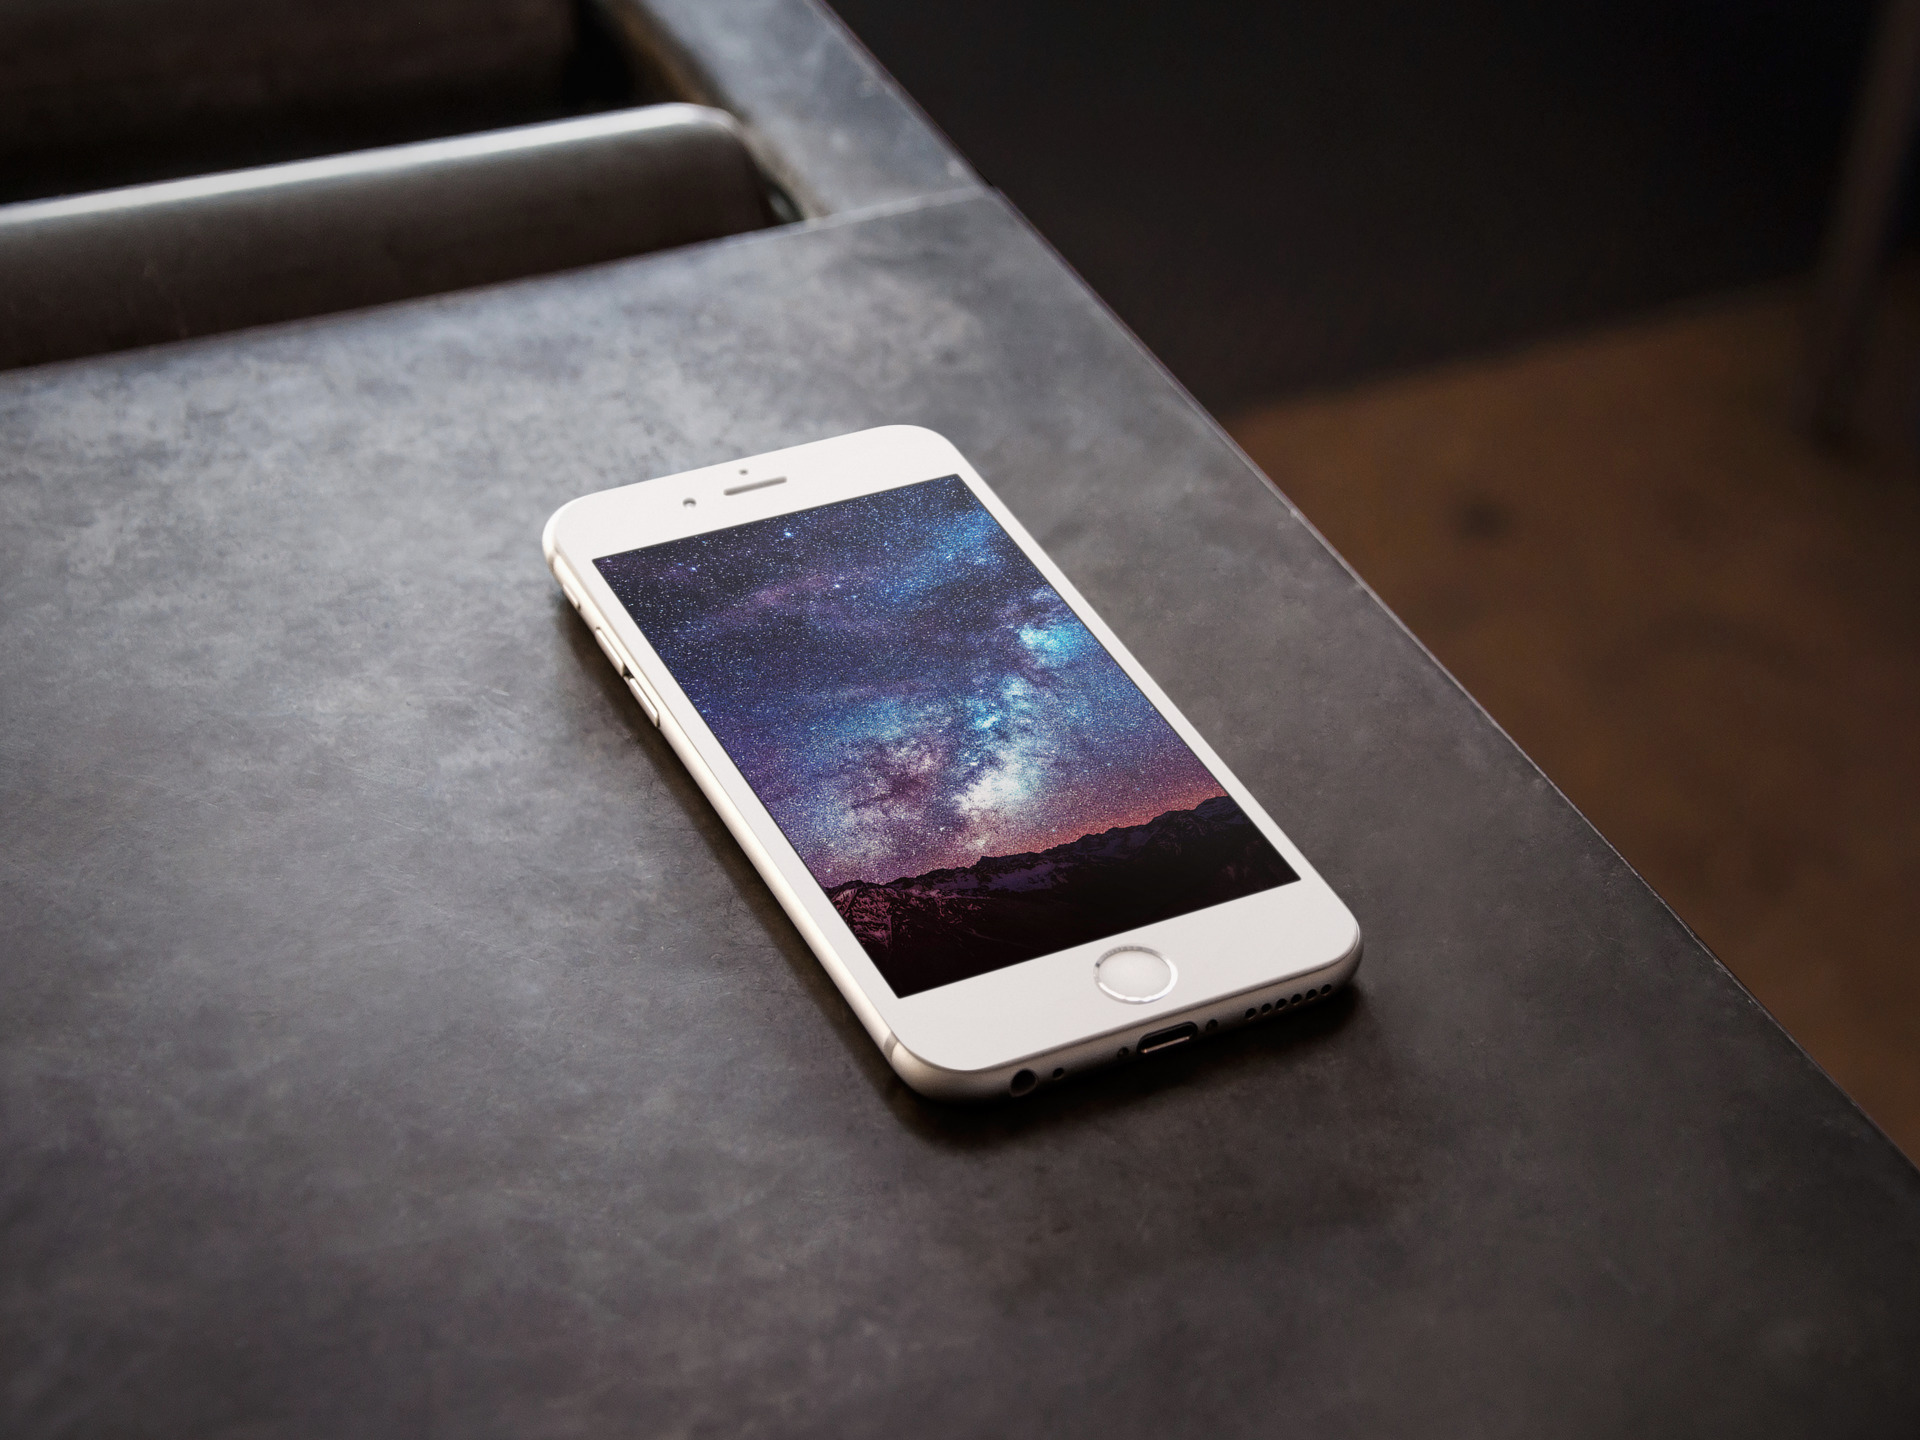 Space galaxy wallpapers for iPhone and iPad